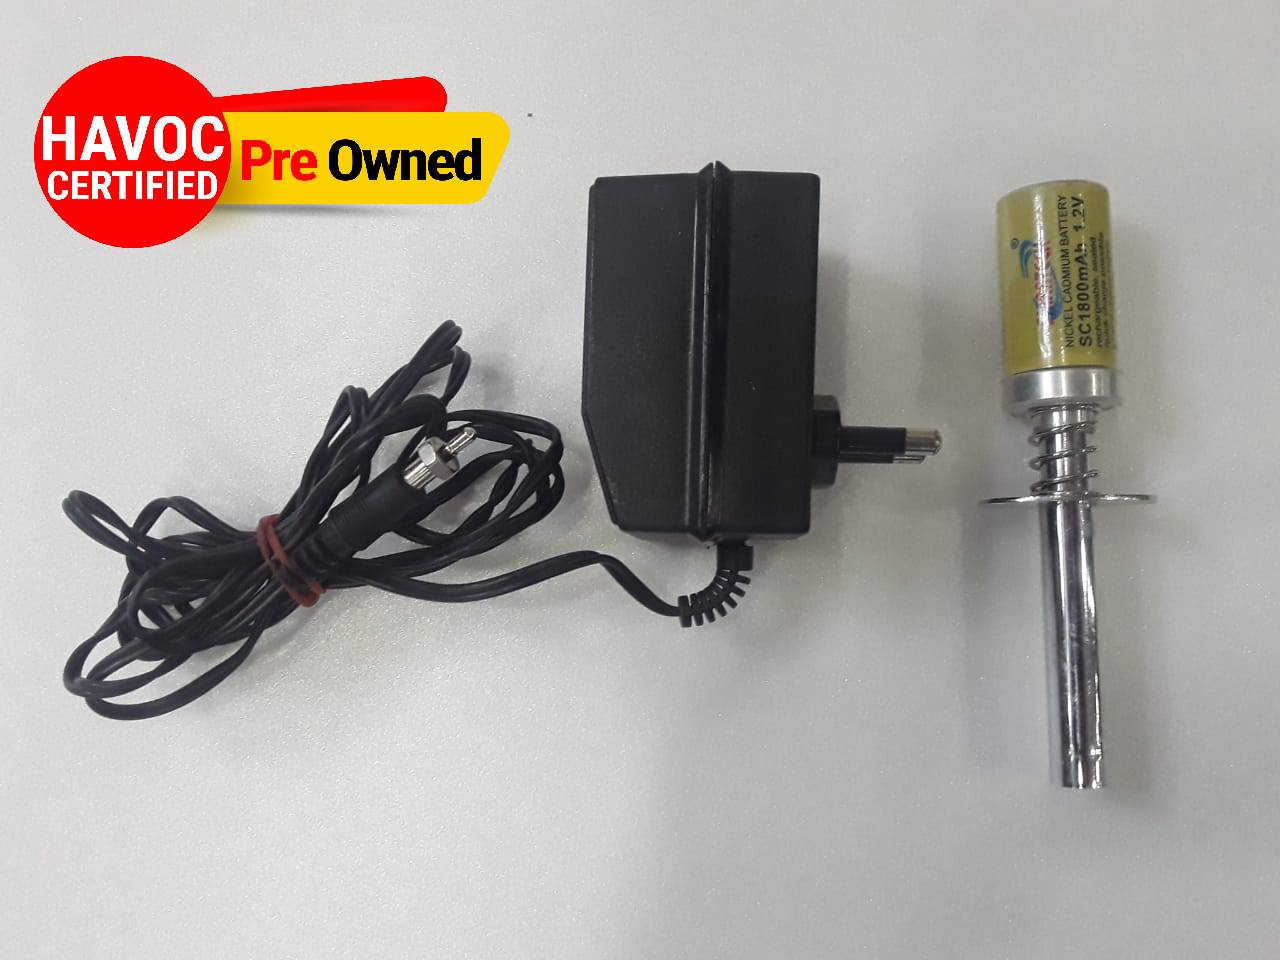 Glow Starter Erd Booster With Charger - Quality Pre Owned